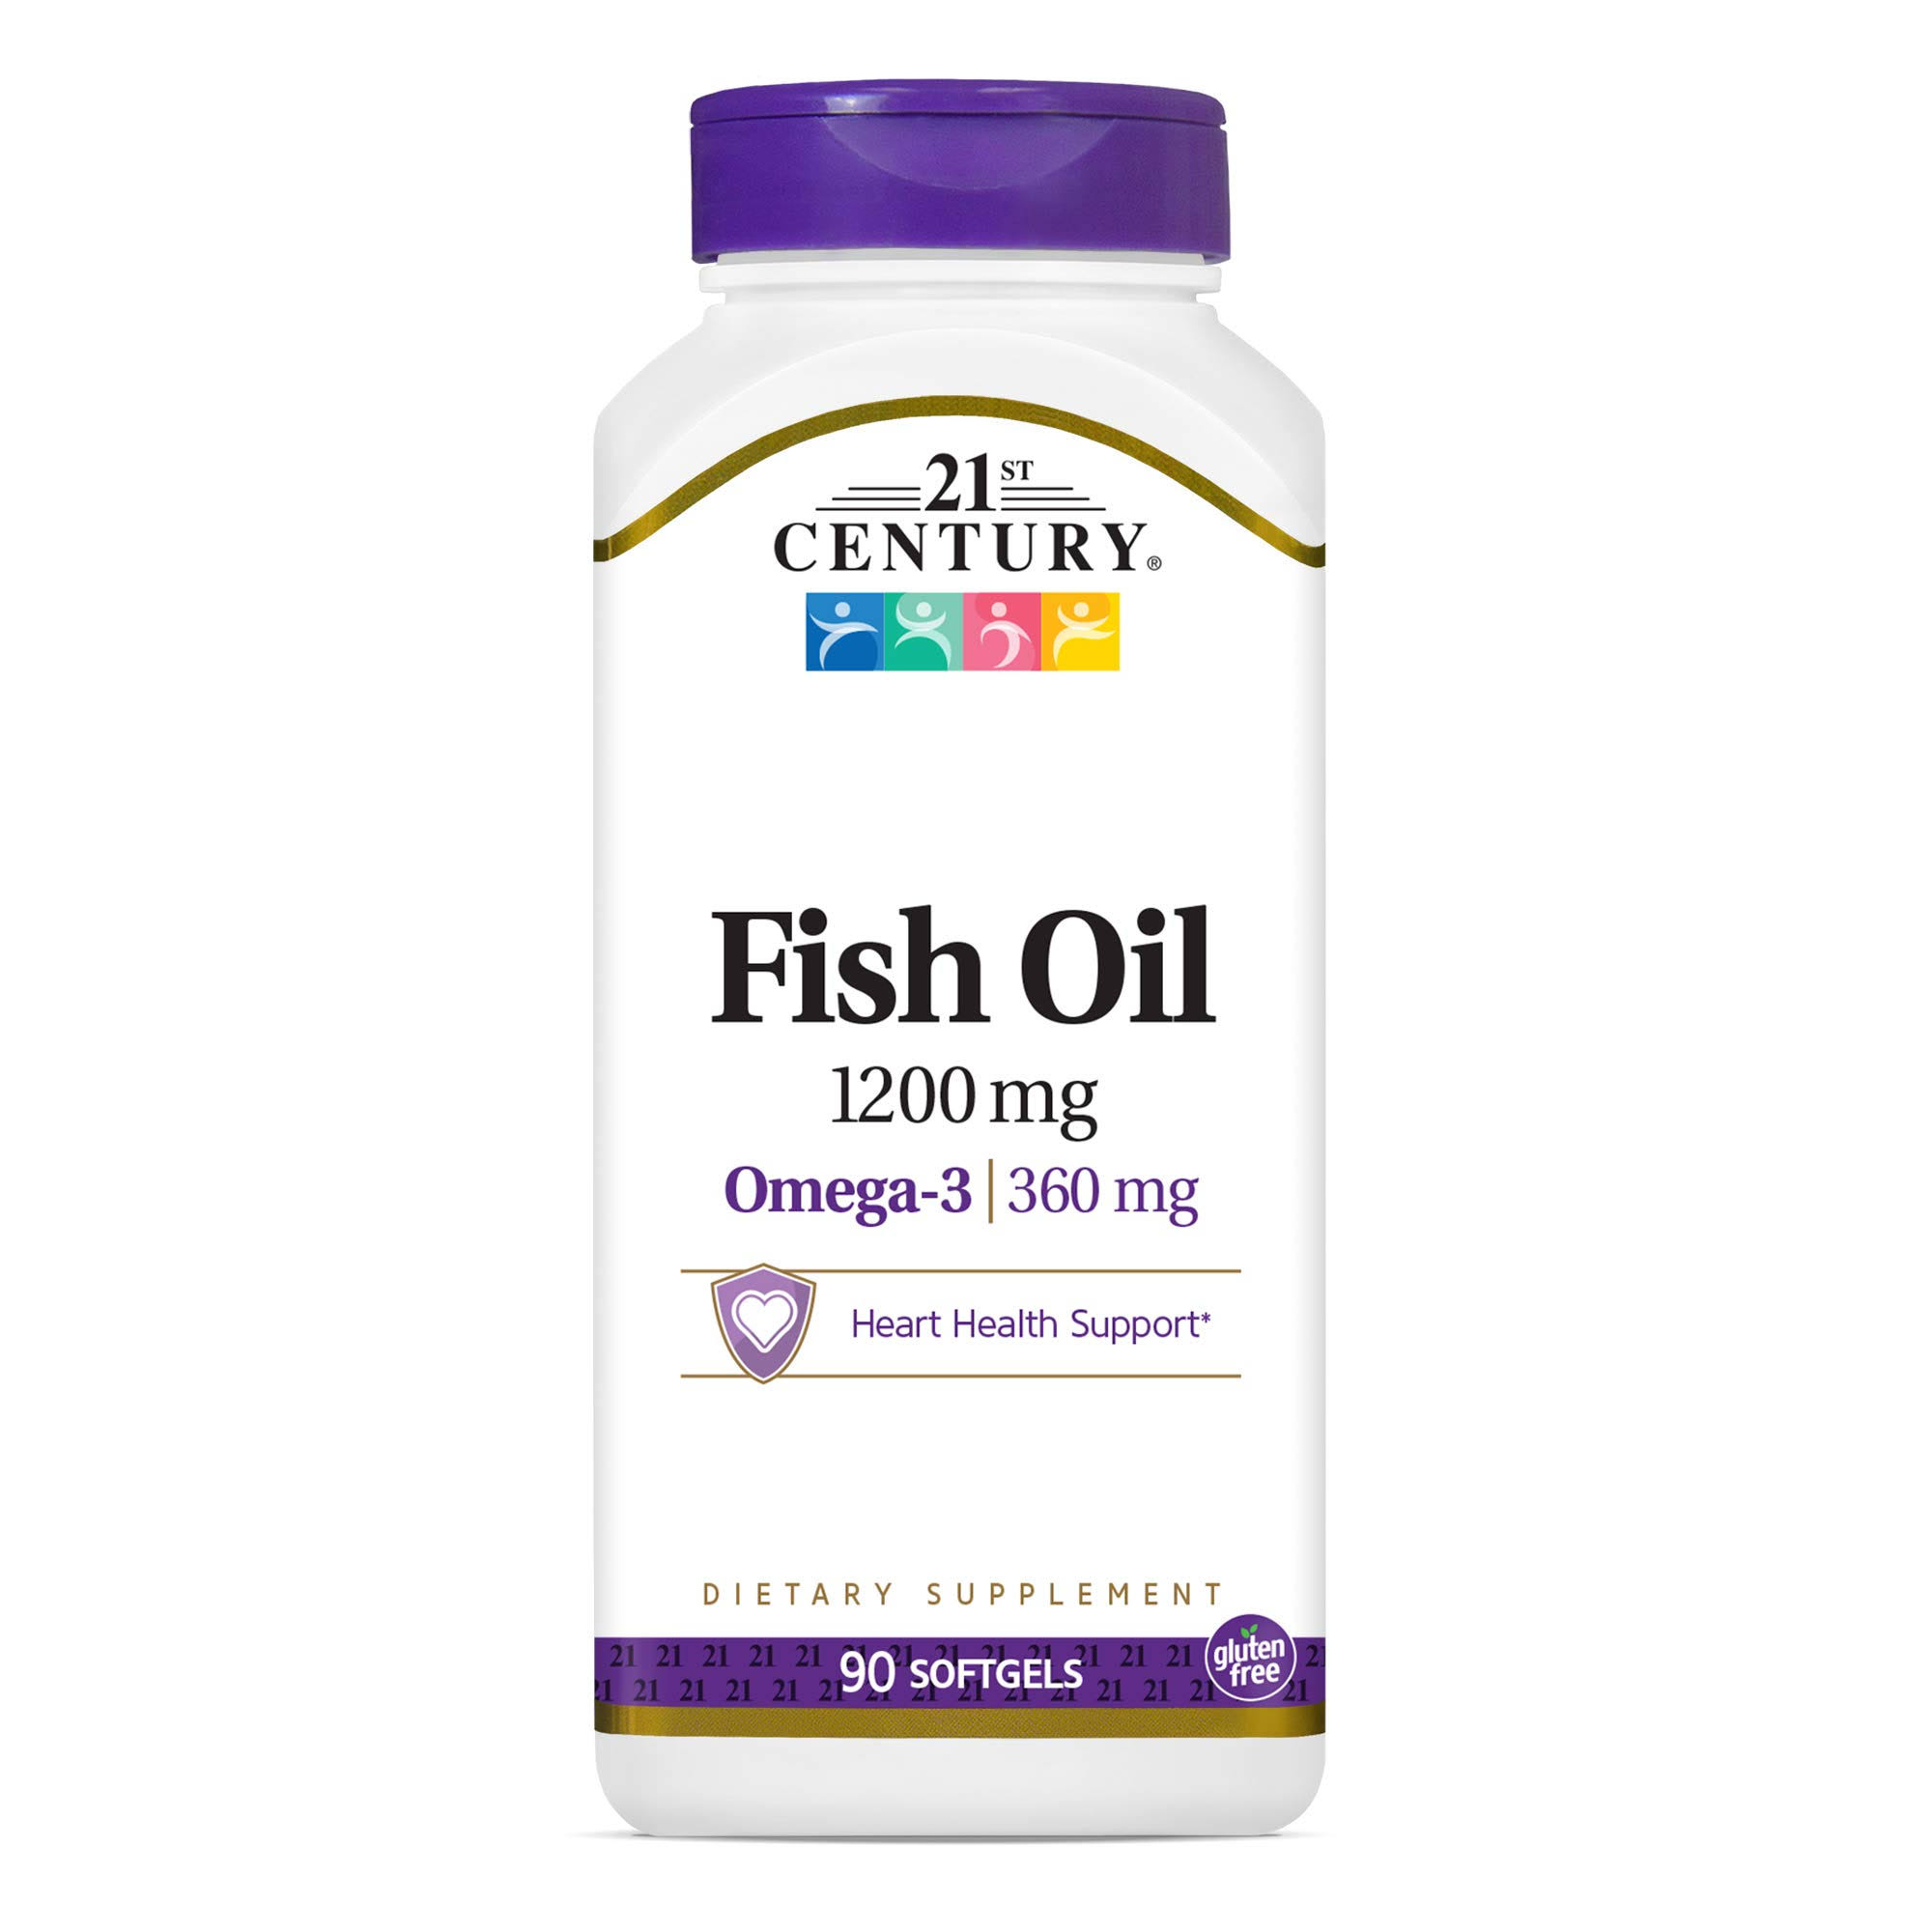 21st Century Fish Oil 1200Mg Dietary Supplement - 90 Softgels